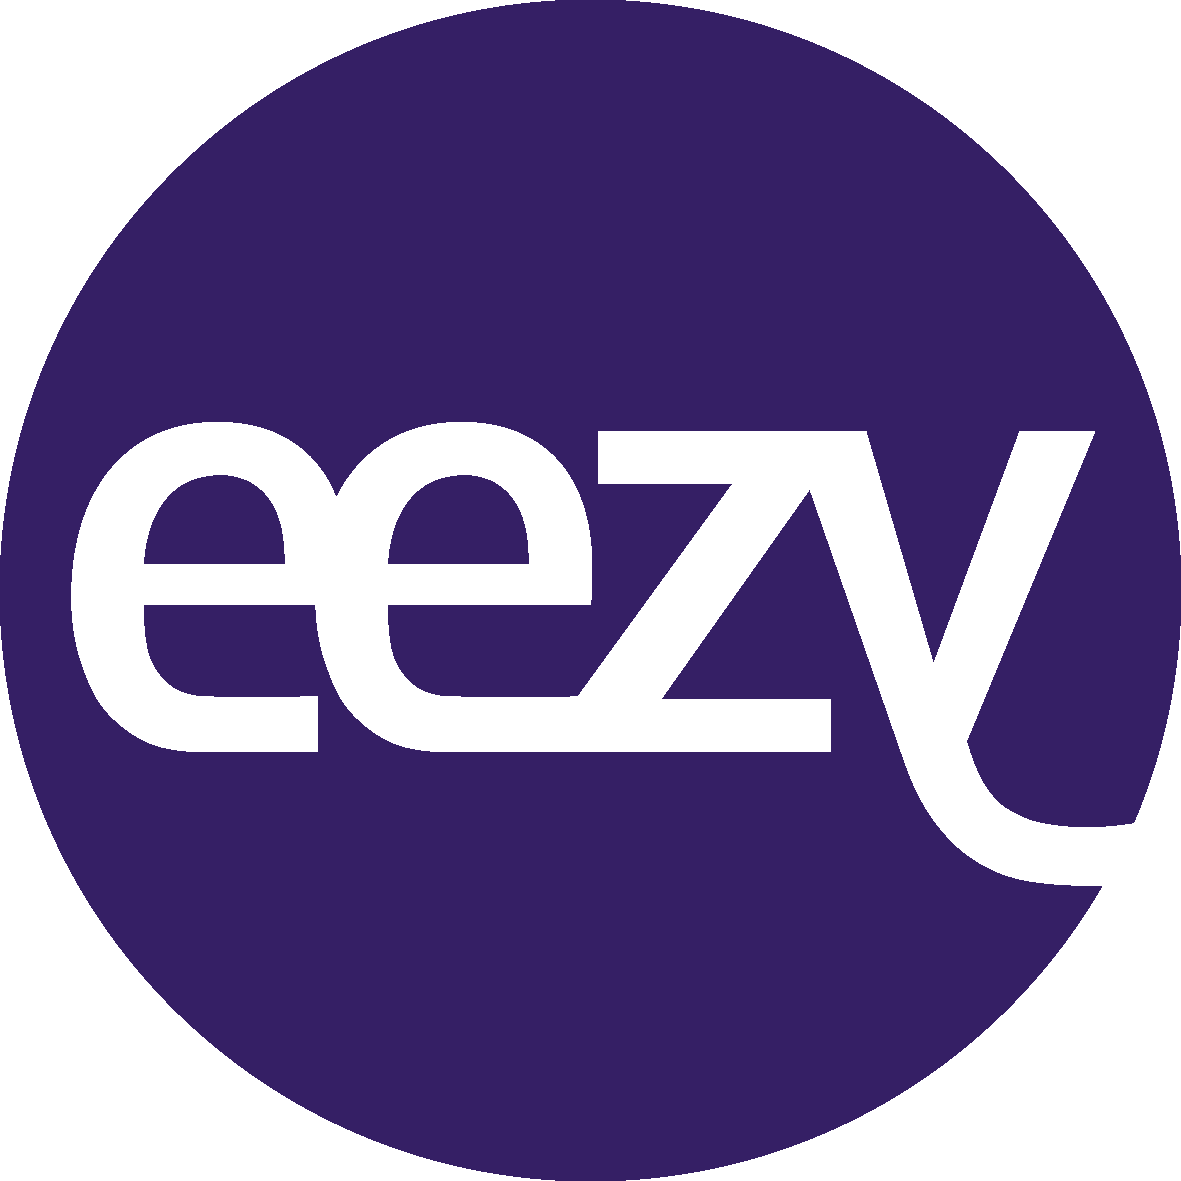 Eezy Plc - Managers'